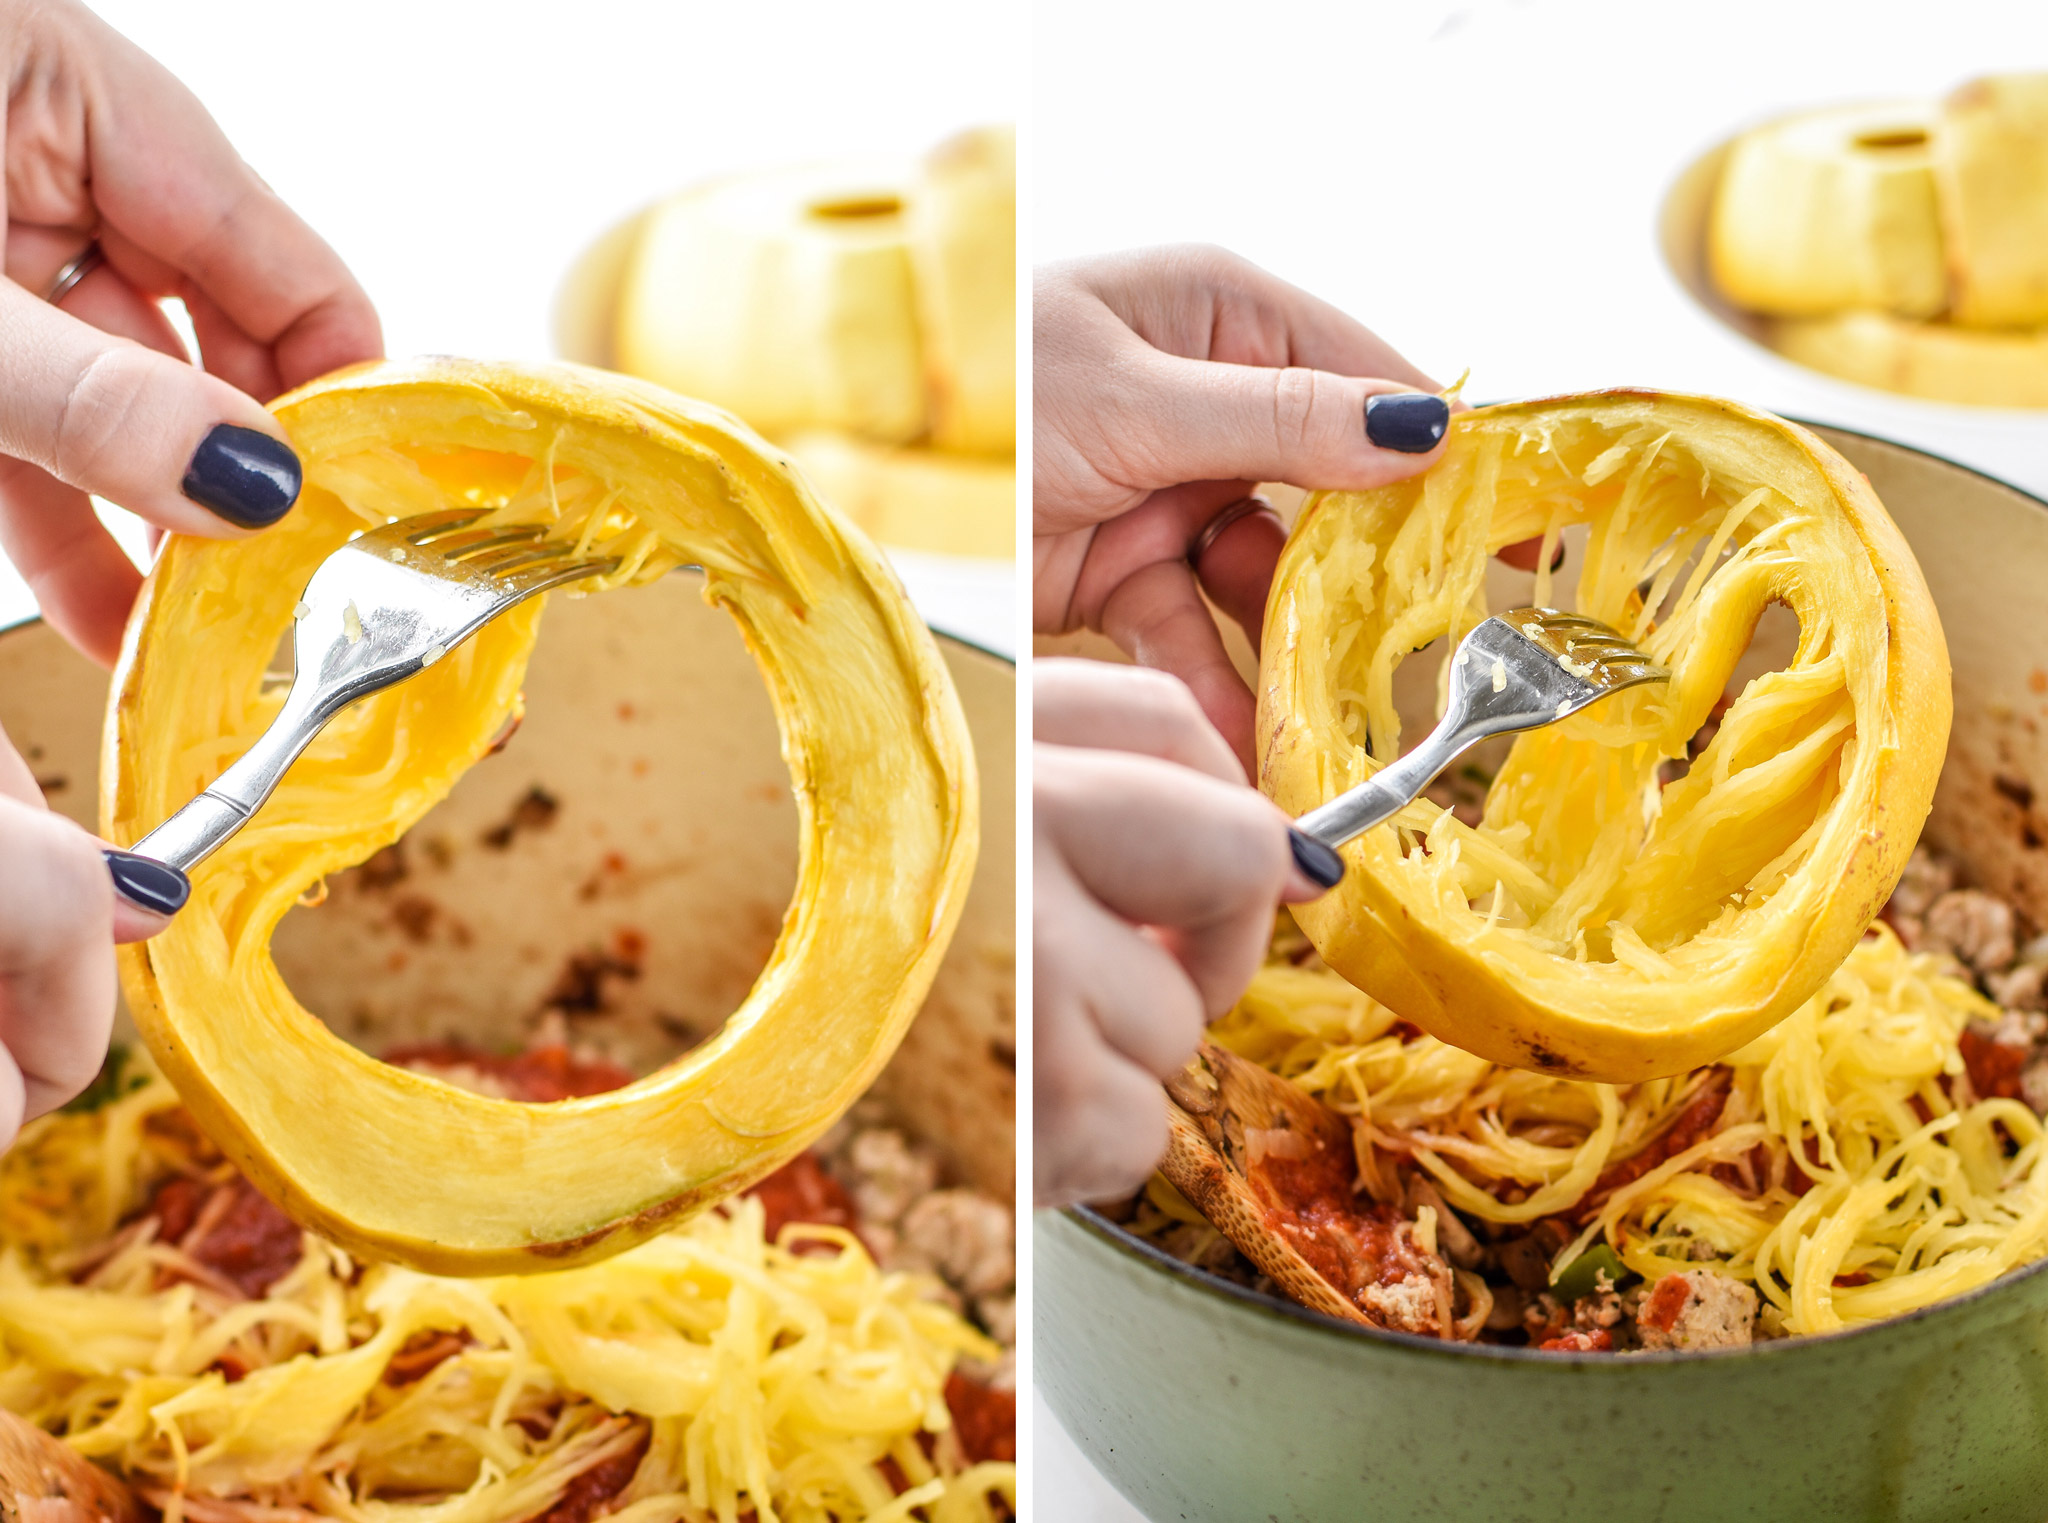 Using a fork to pull the squash noodles from the skin for the Low carb Spaghetti Squash Spaghetti Bake